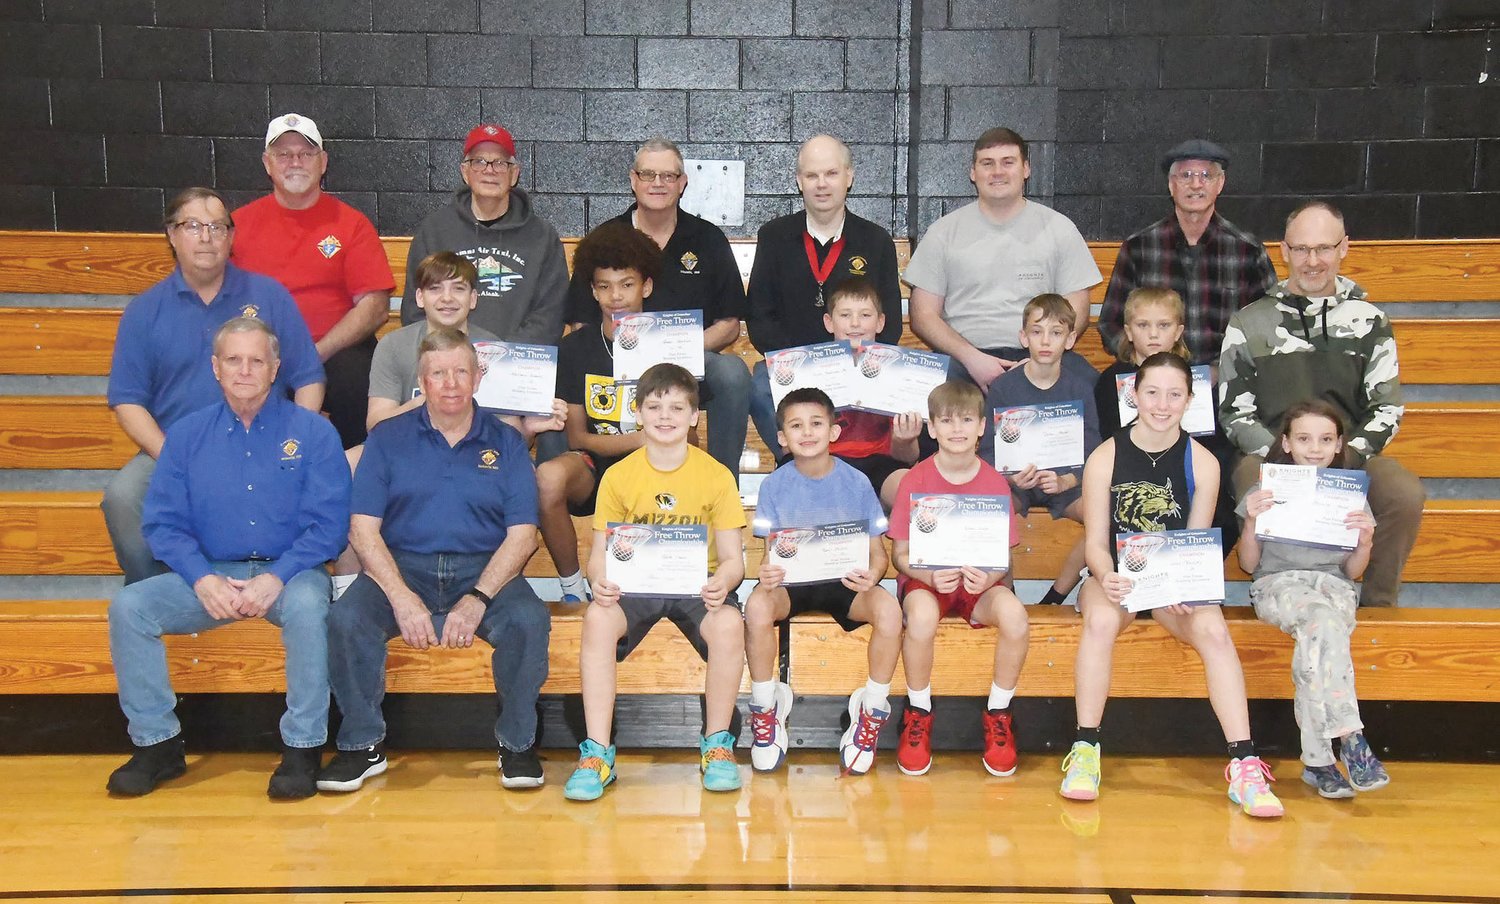 The Moberly Knights of Columbus Council No. 995 conducted a youth free-throw shooting competition on Sunday, Jan. 22 at St. Pius X School. Several local boys and girls participated in the event. The winners have advanced to the district competition set for Sunday, Feb. 5, at Father Tolton Regional Catholic in Columbia.